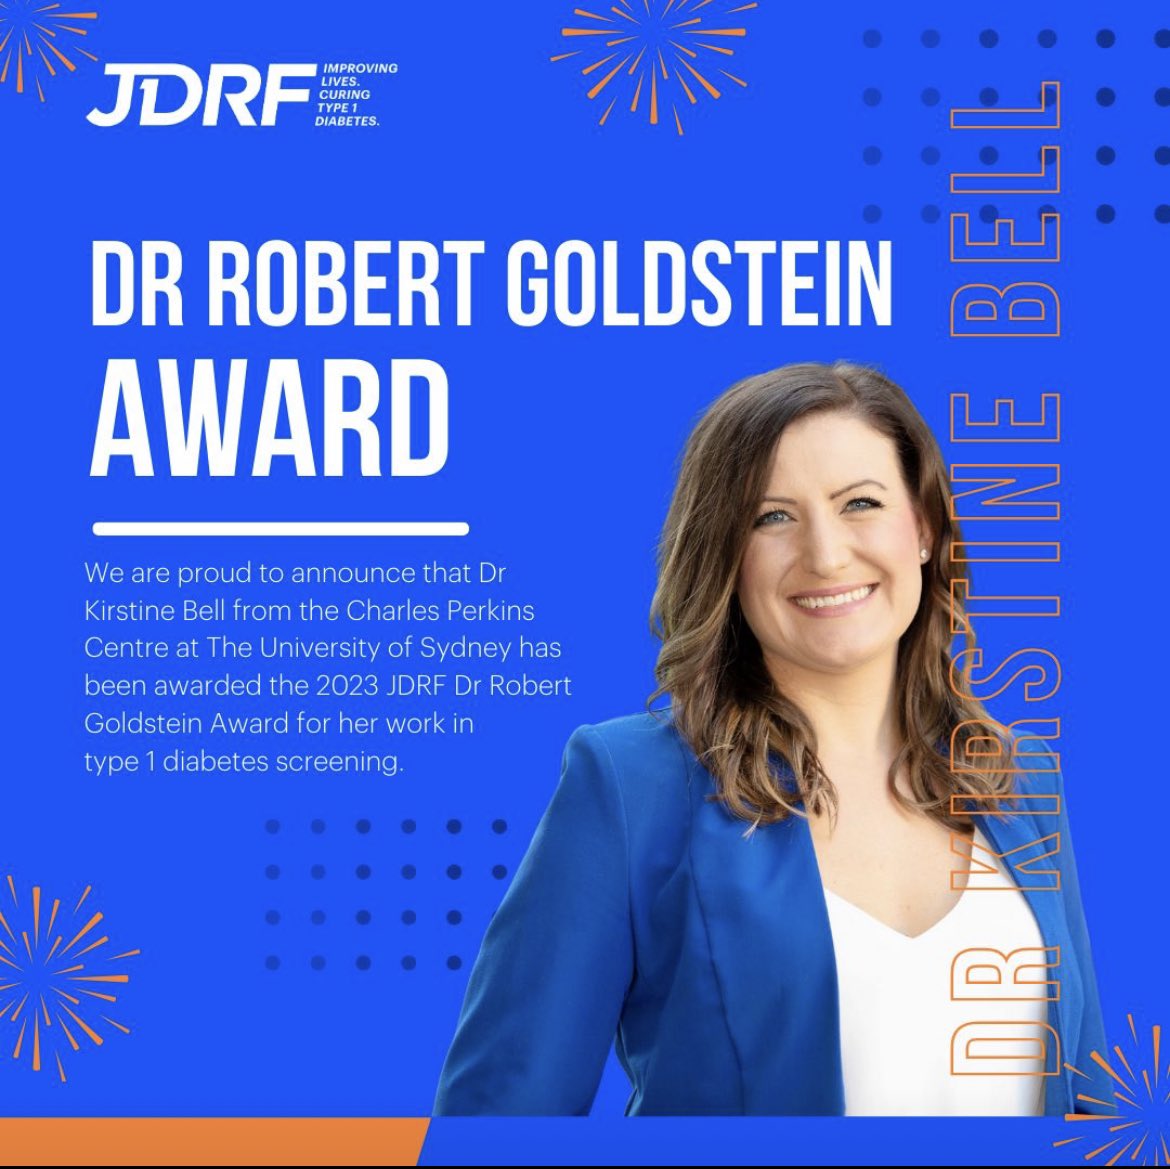 It’s been a pretty amazing month - firstly being awarded the @JDRF Dr Robert Goldstein Award and then an @nhmrc Investigator Grant!

Incredible thanks to @CPC_usyd @JDRFaus & @JDRFResearch and the whole Type 1 Diabetes National Screening Pilot team across Australia & int’
#T1D